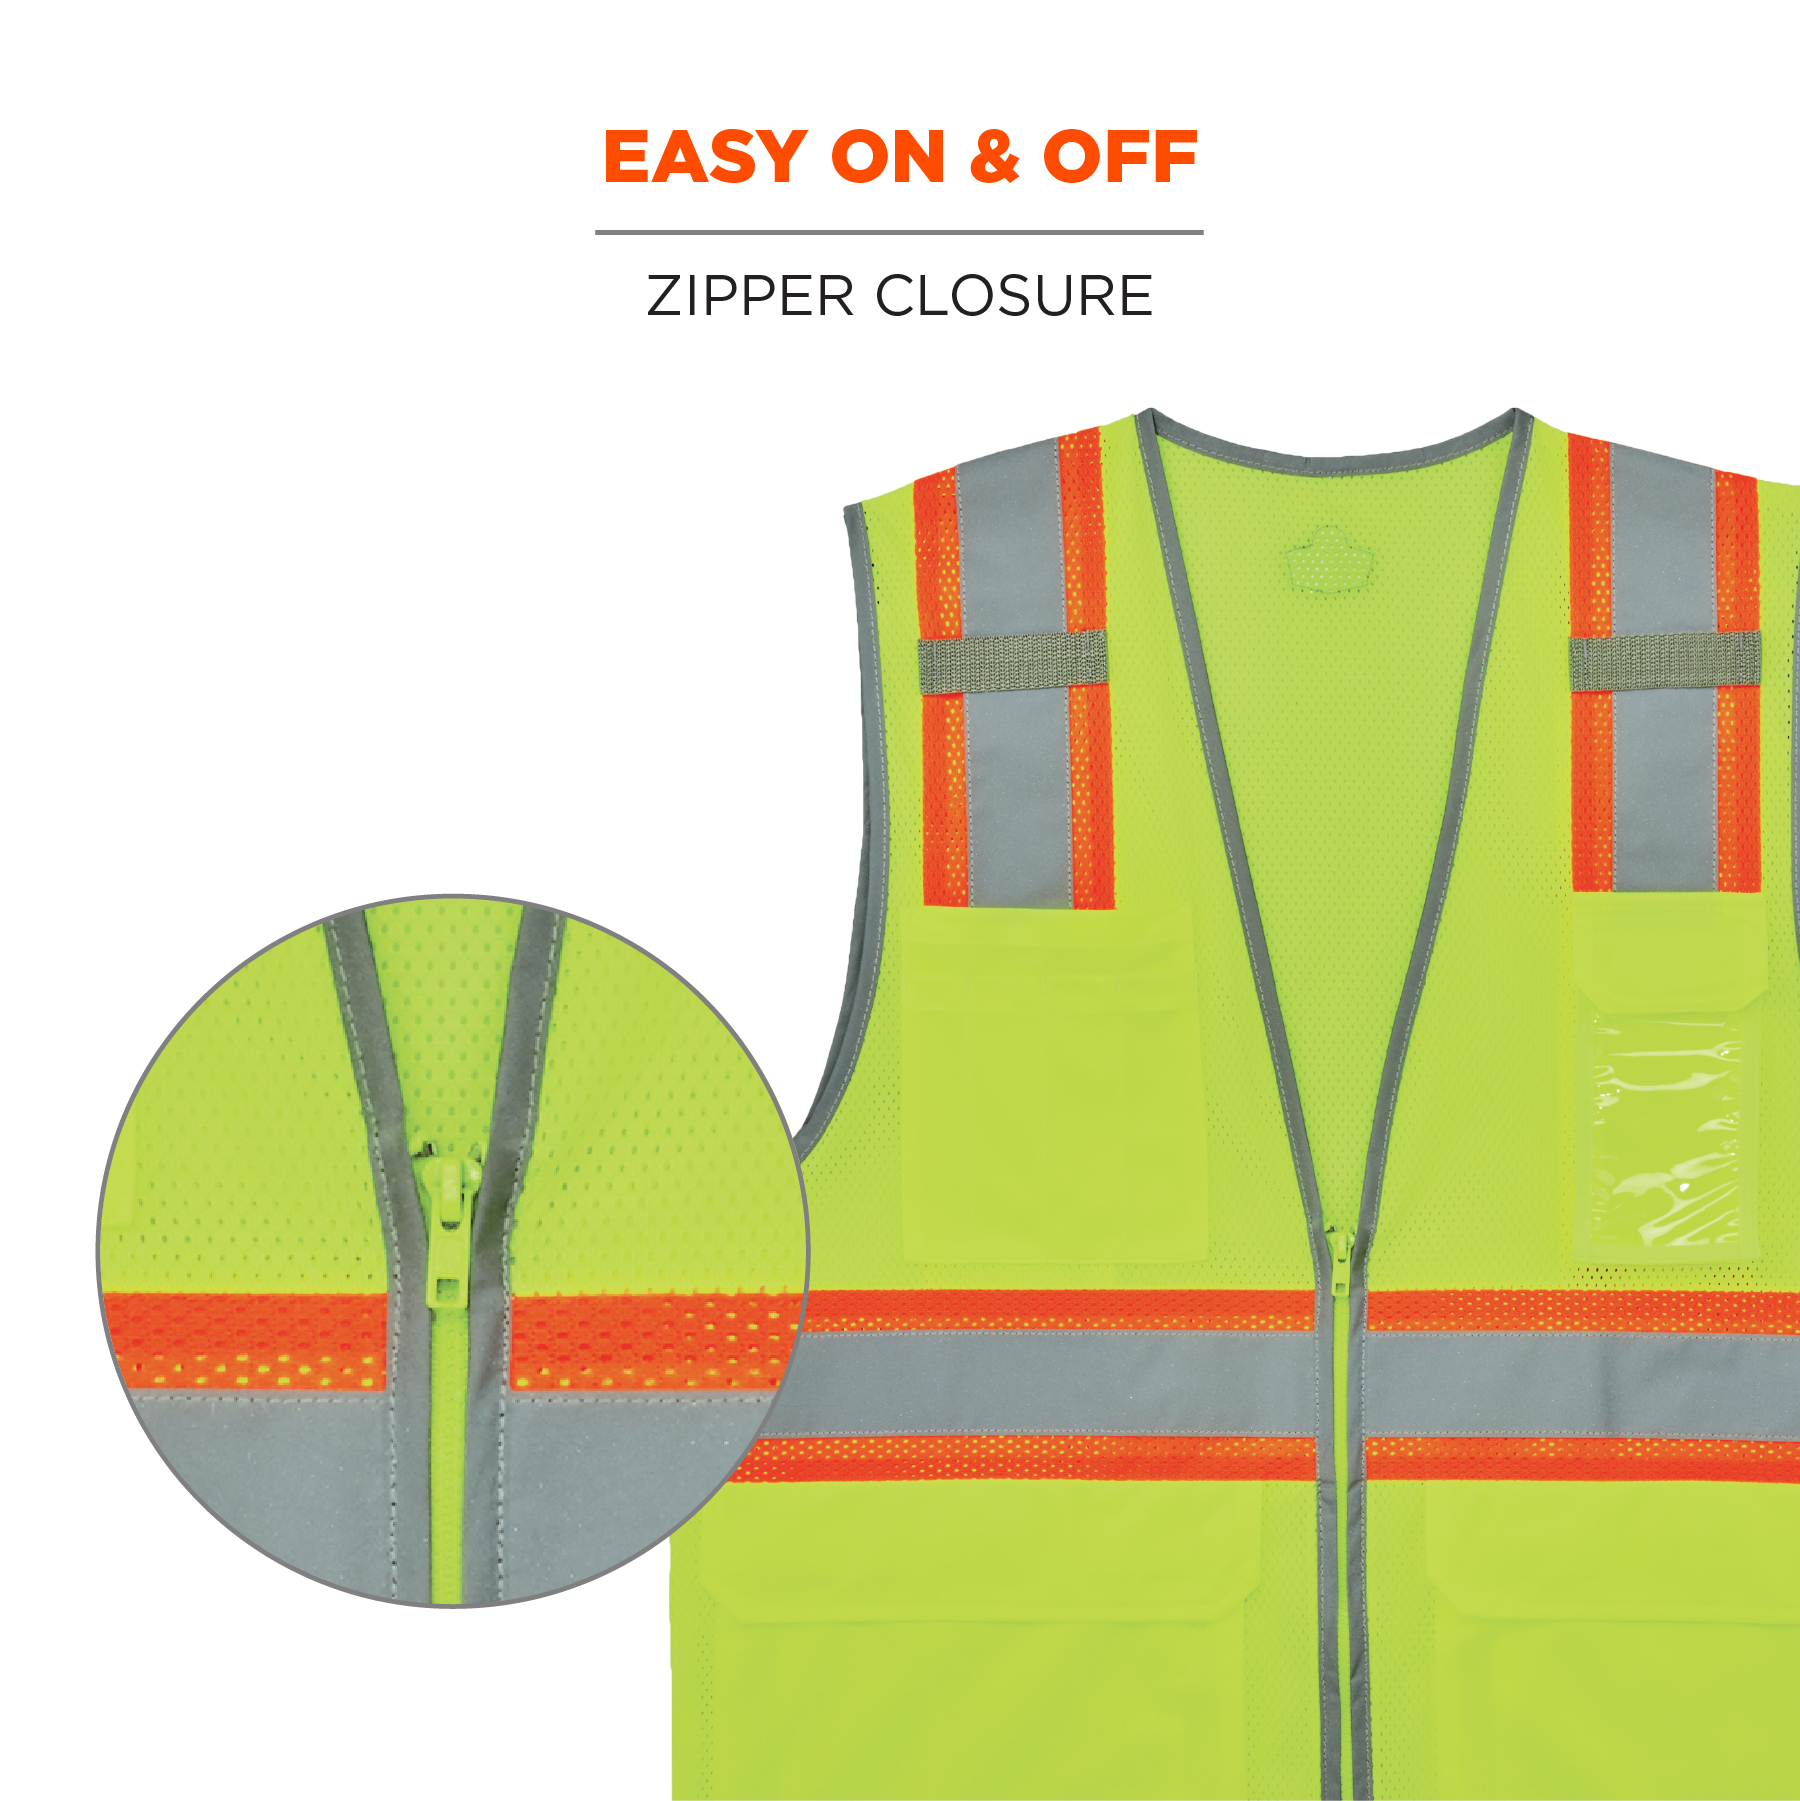 New High Visibility Two Tone Mesh Safety Vest Reflective With Pockets And Zipper 